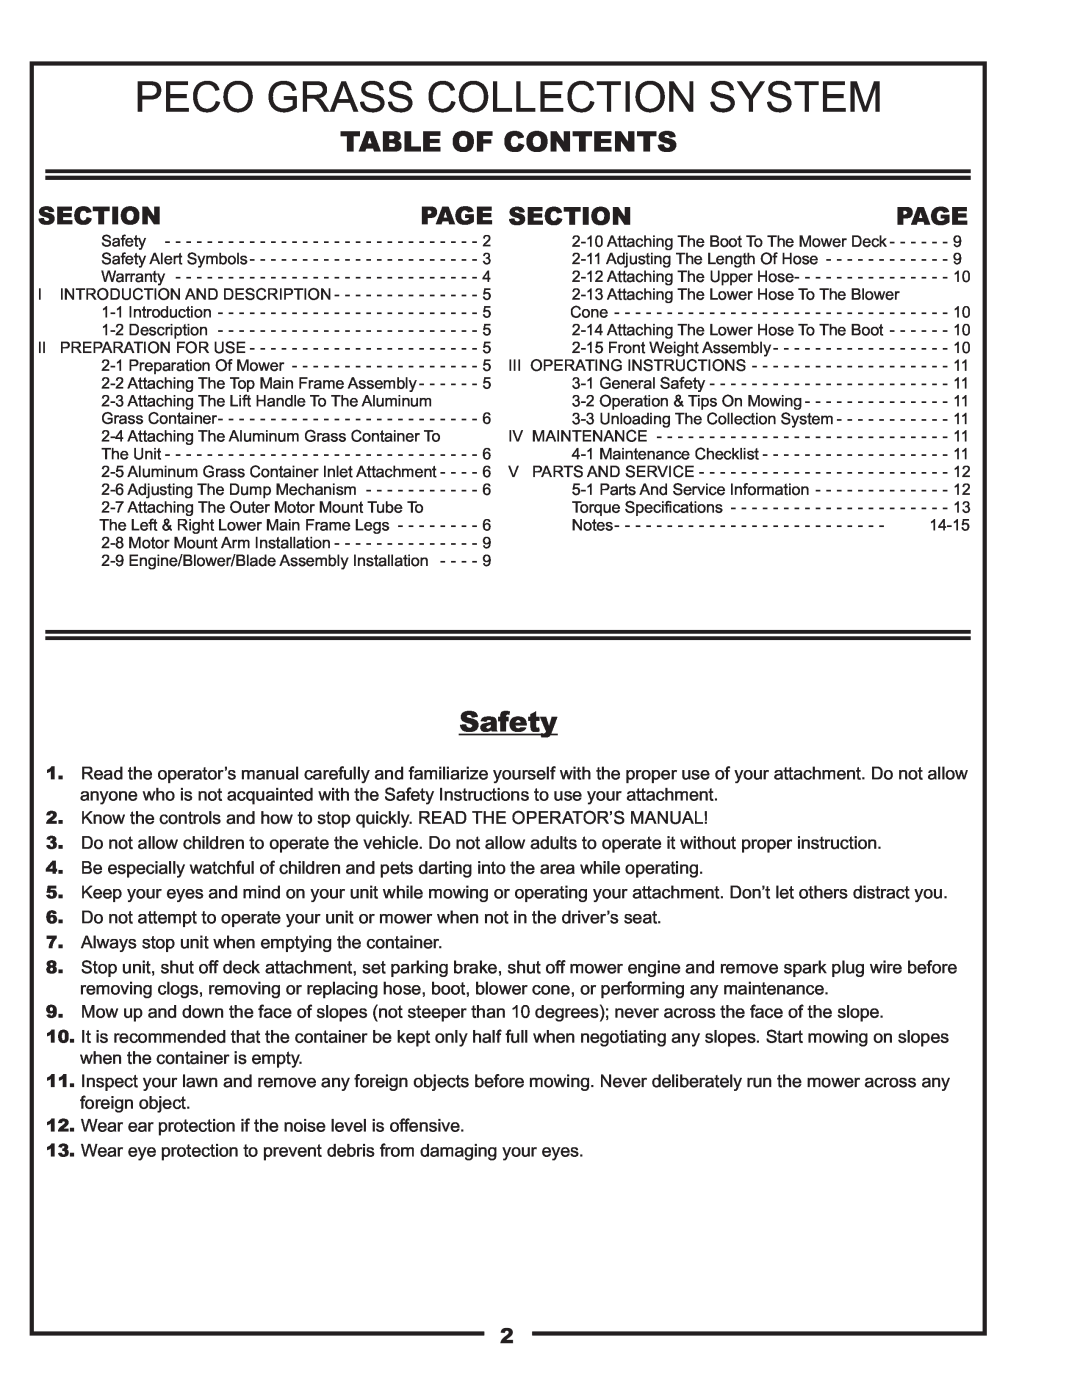 Gravely 12621209-12 manual Peco Grass Collection System, Table Of Contents, Safety, Page Section 